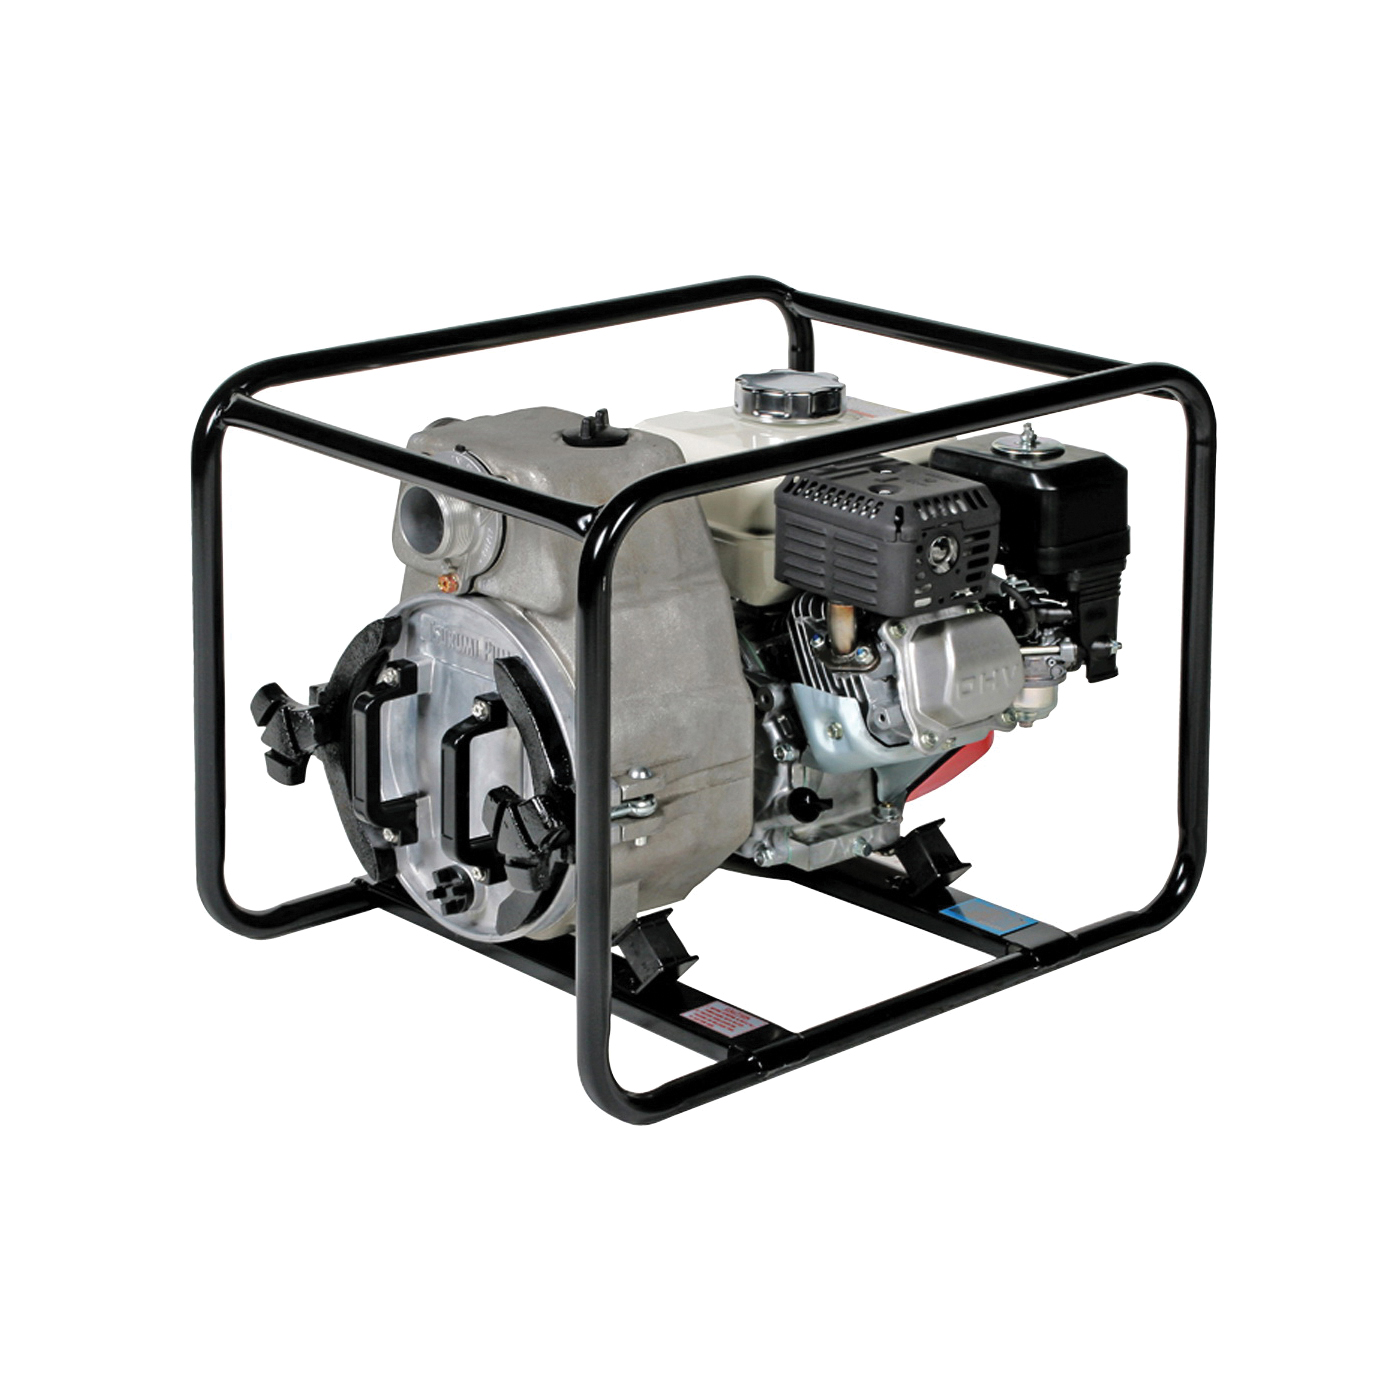 EPT3-50HA Trash Pump, 5.5 hp, 2 in Outlet, 90 ft Max Head, 190 gpm, Iron/Stainless Steel